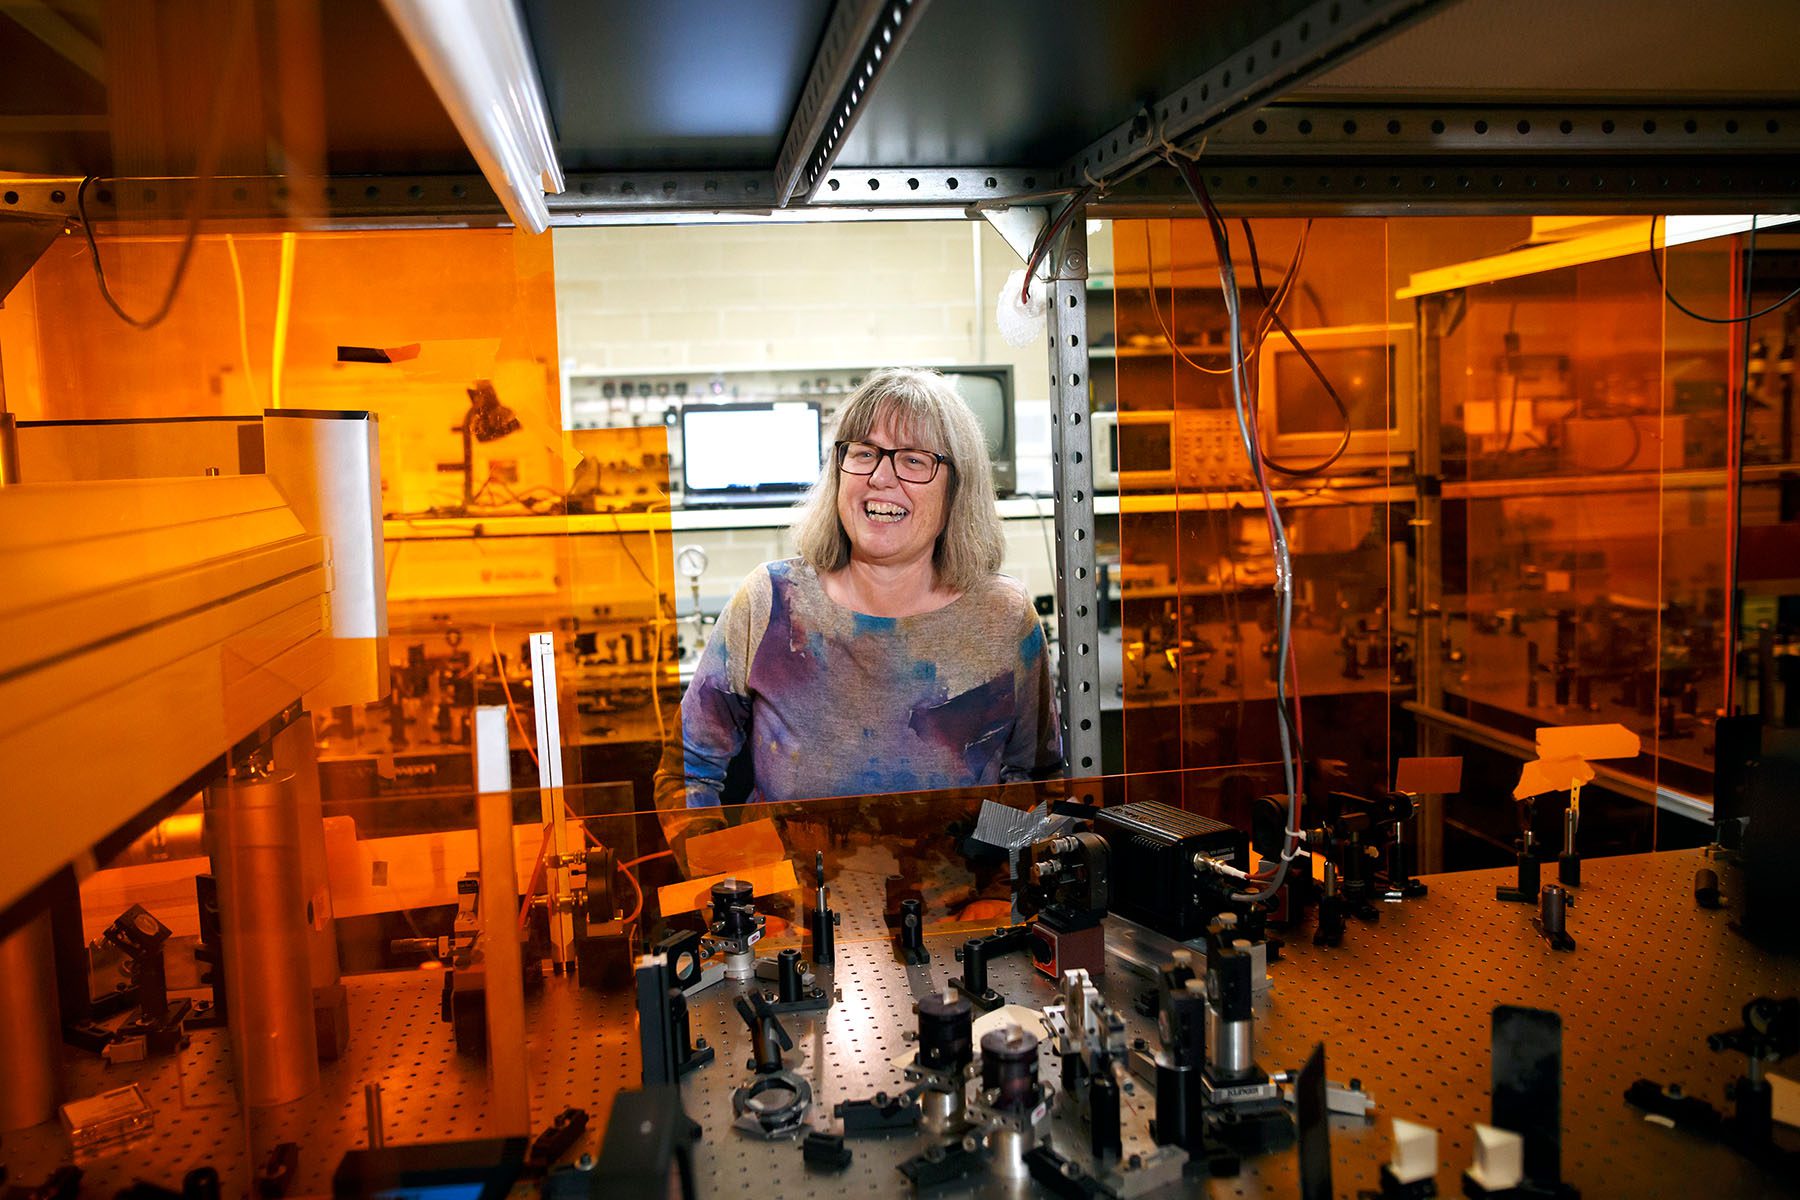 Professor Dr. Donna Strickland smiles as she shows off instruments in her lab.